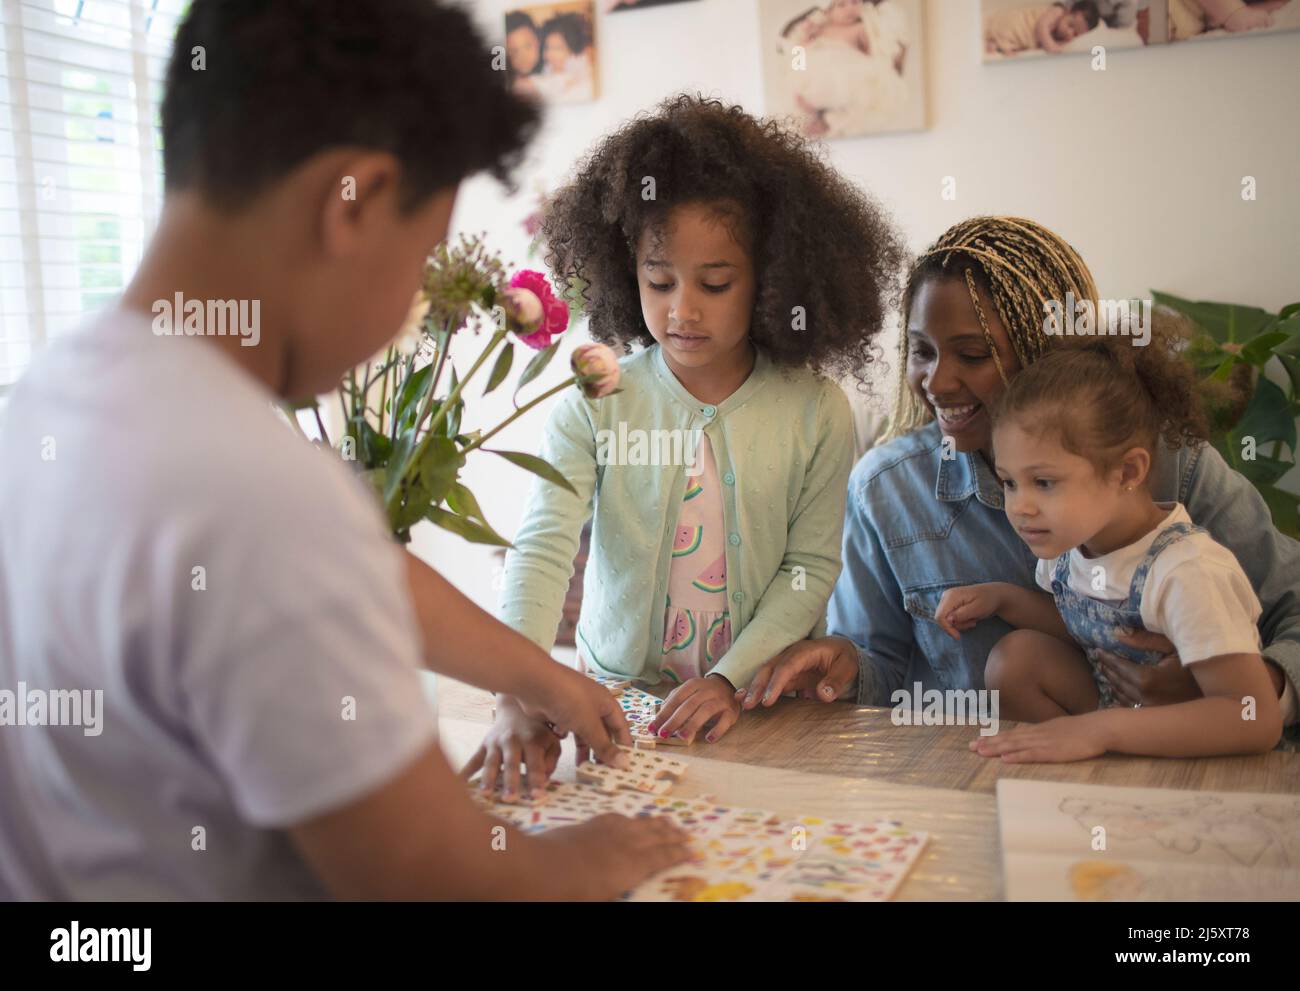 Mother and kids assembling puzzle at table Stock Photo